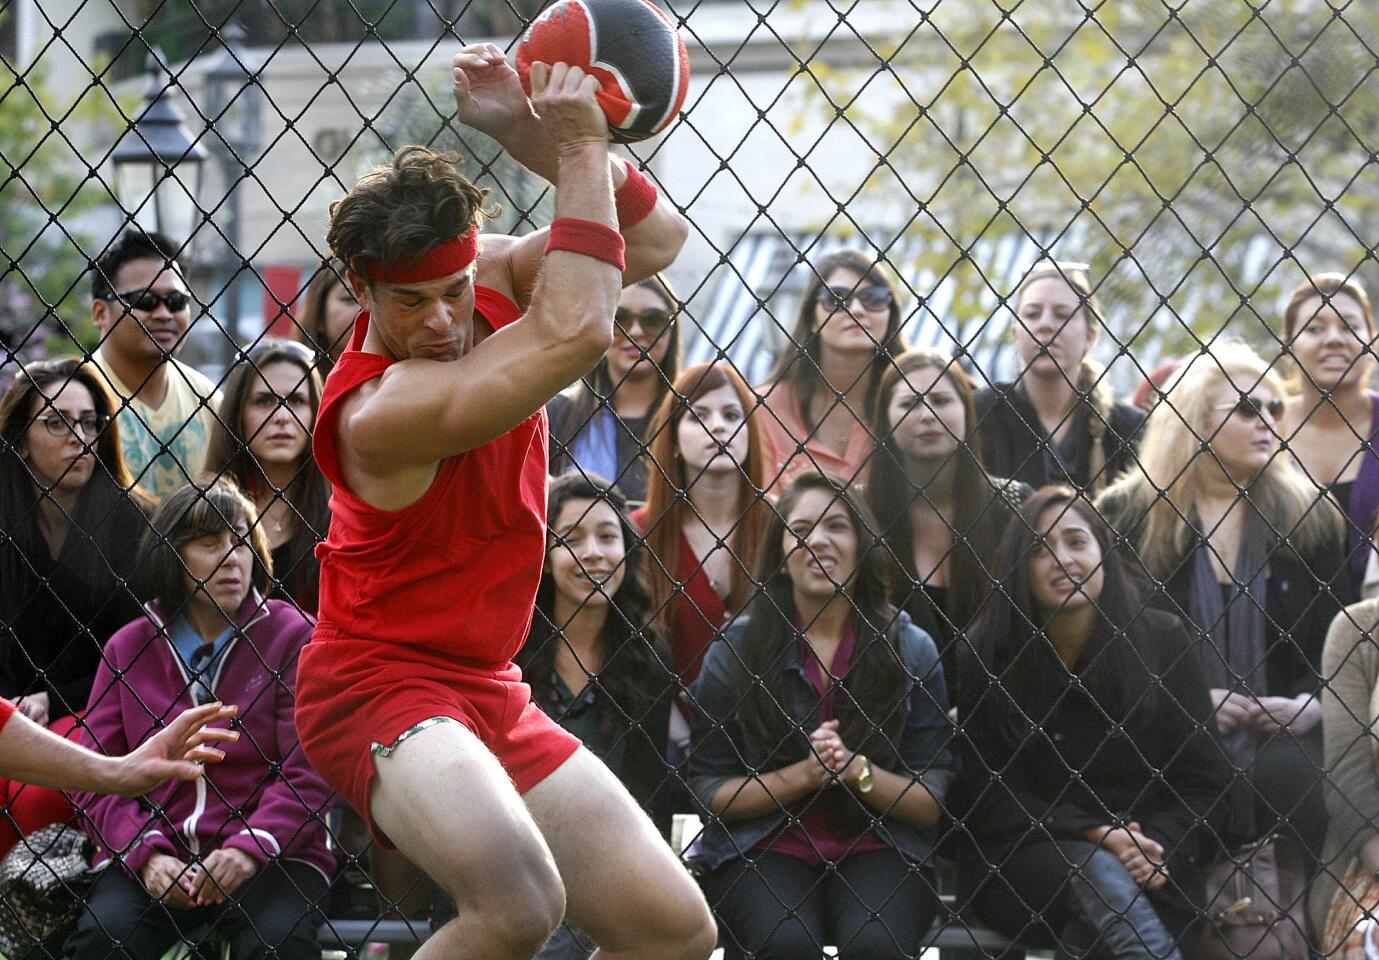 Photo Gallery: Bachelorette dodge ball match recorded at Americana at Brand